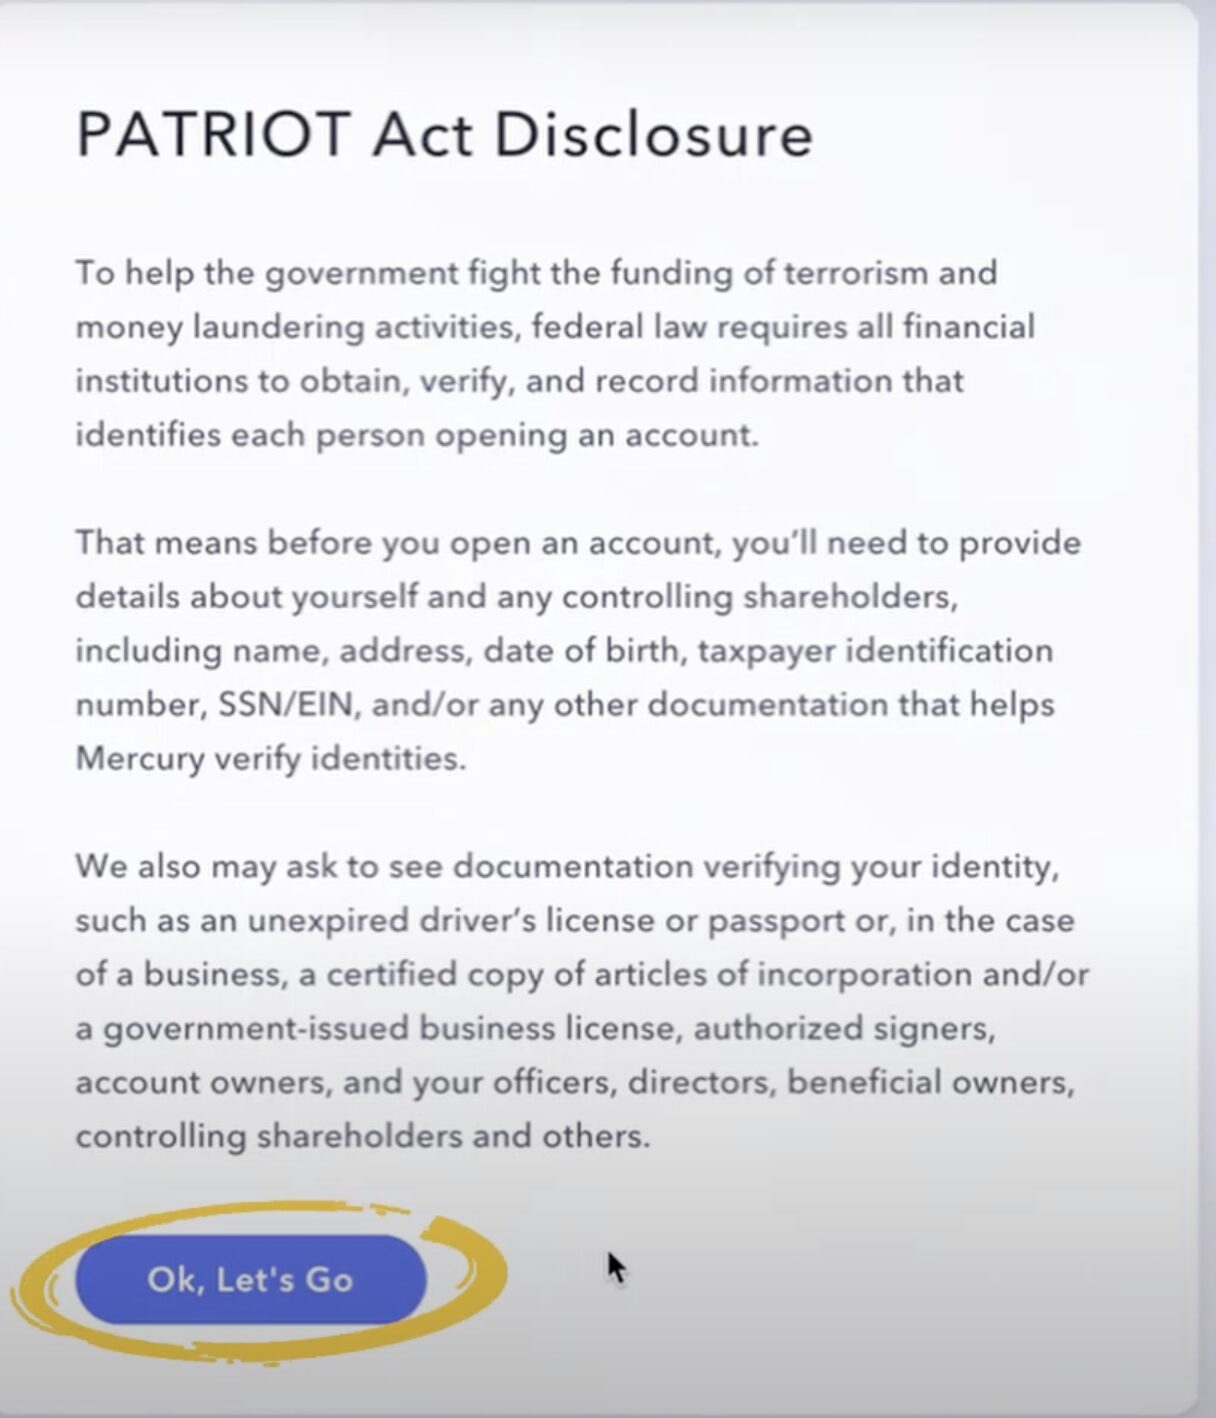 How to open a Mercury bank account PATRIOT act